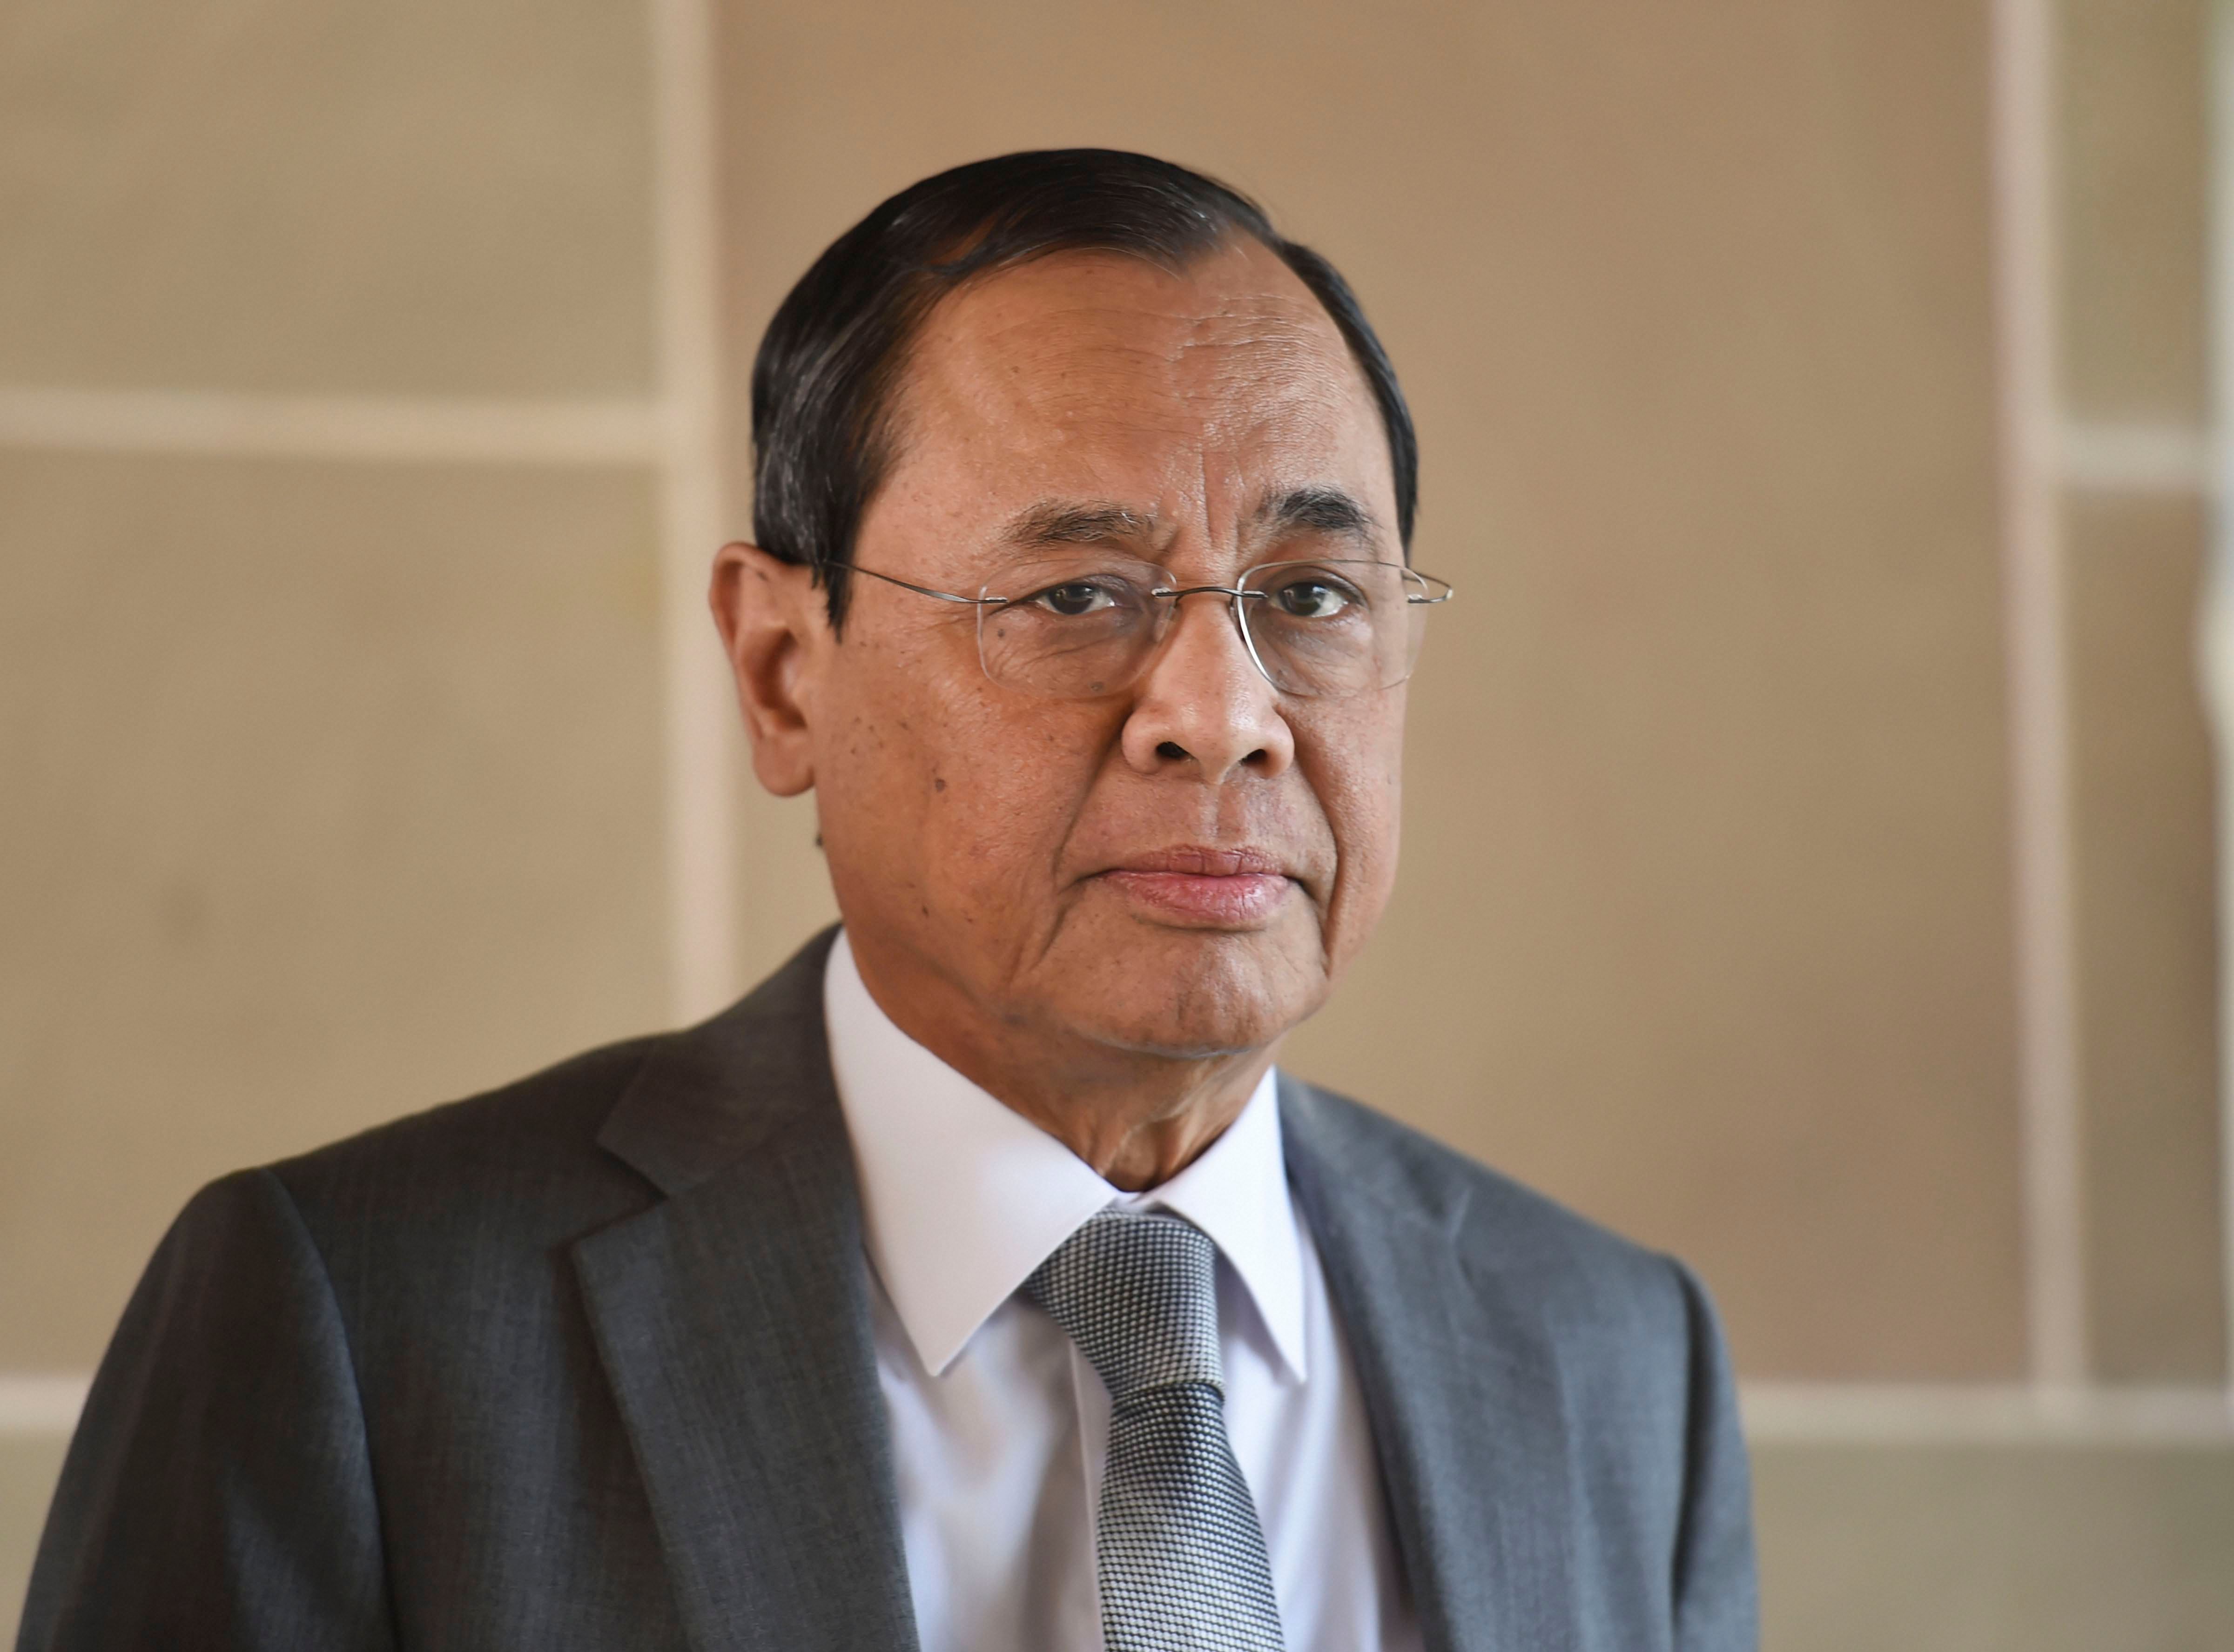 Outgoing Chief Justice of India Justice Ranjan Gogoi. (PTI Photo)